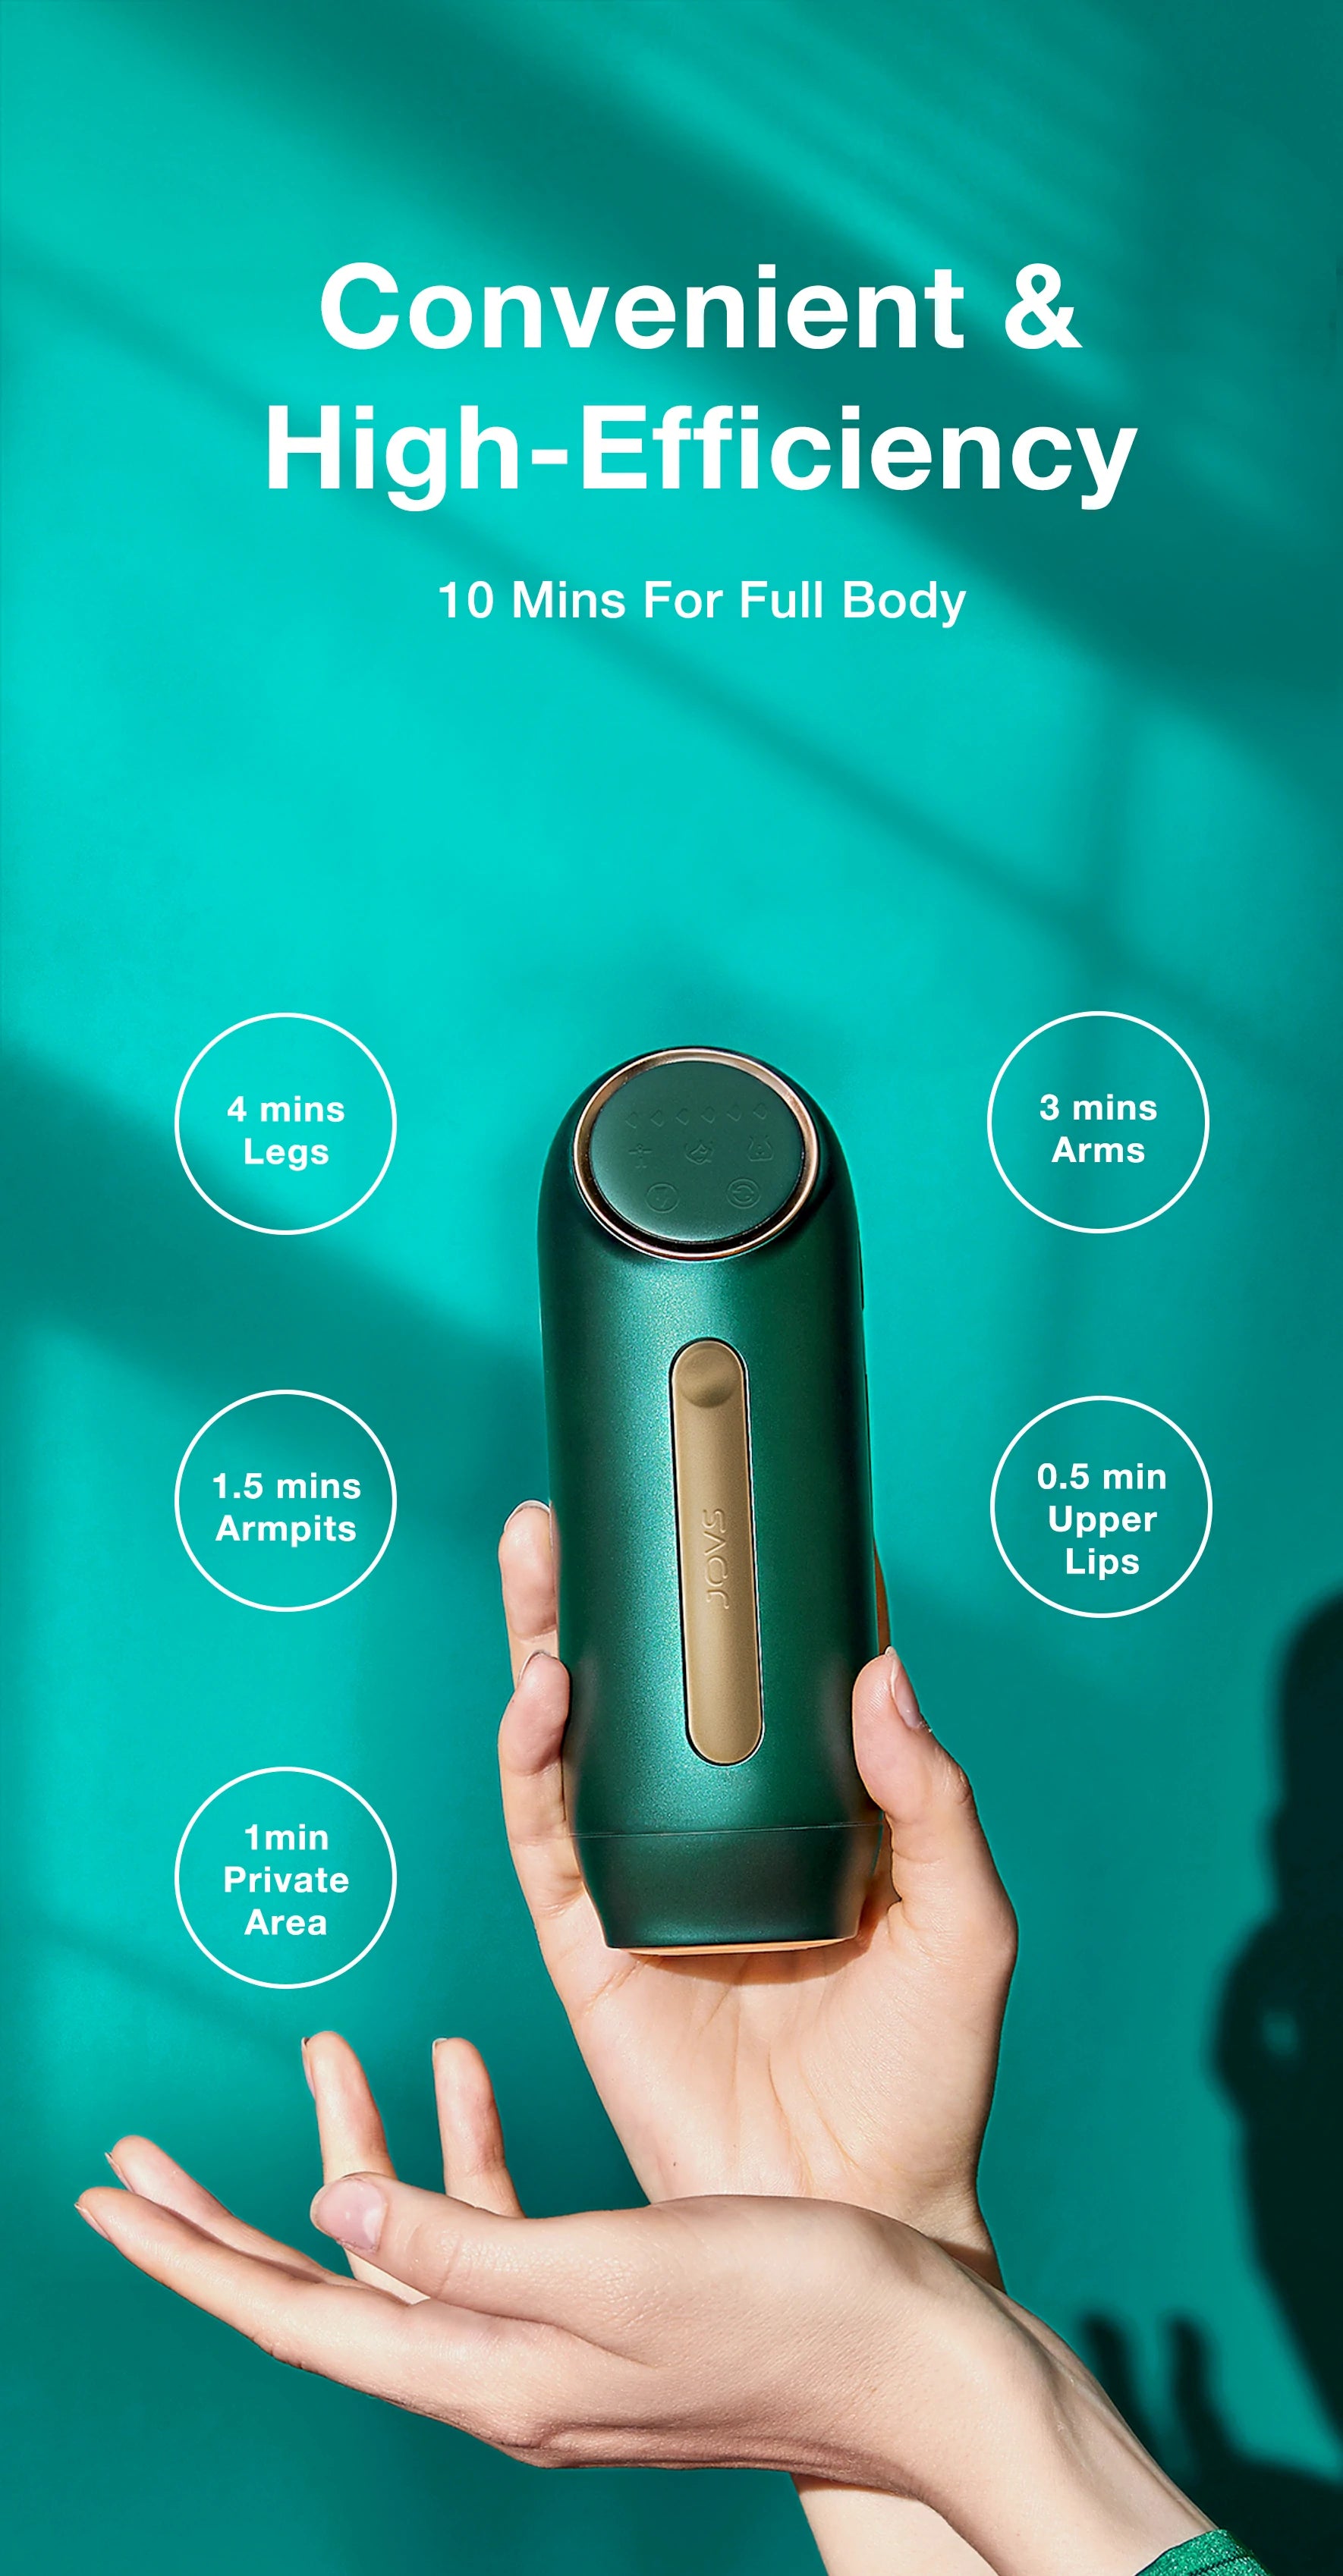 Hand Holding JOVS Mini Wireless IPL Device, Highlighting Time-efficient Treatment for Legs, Arms, and Sensitive Areas